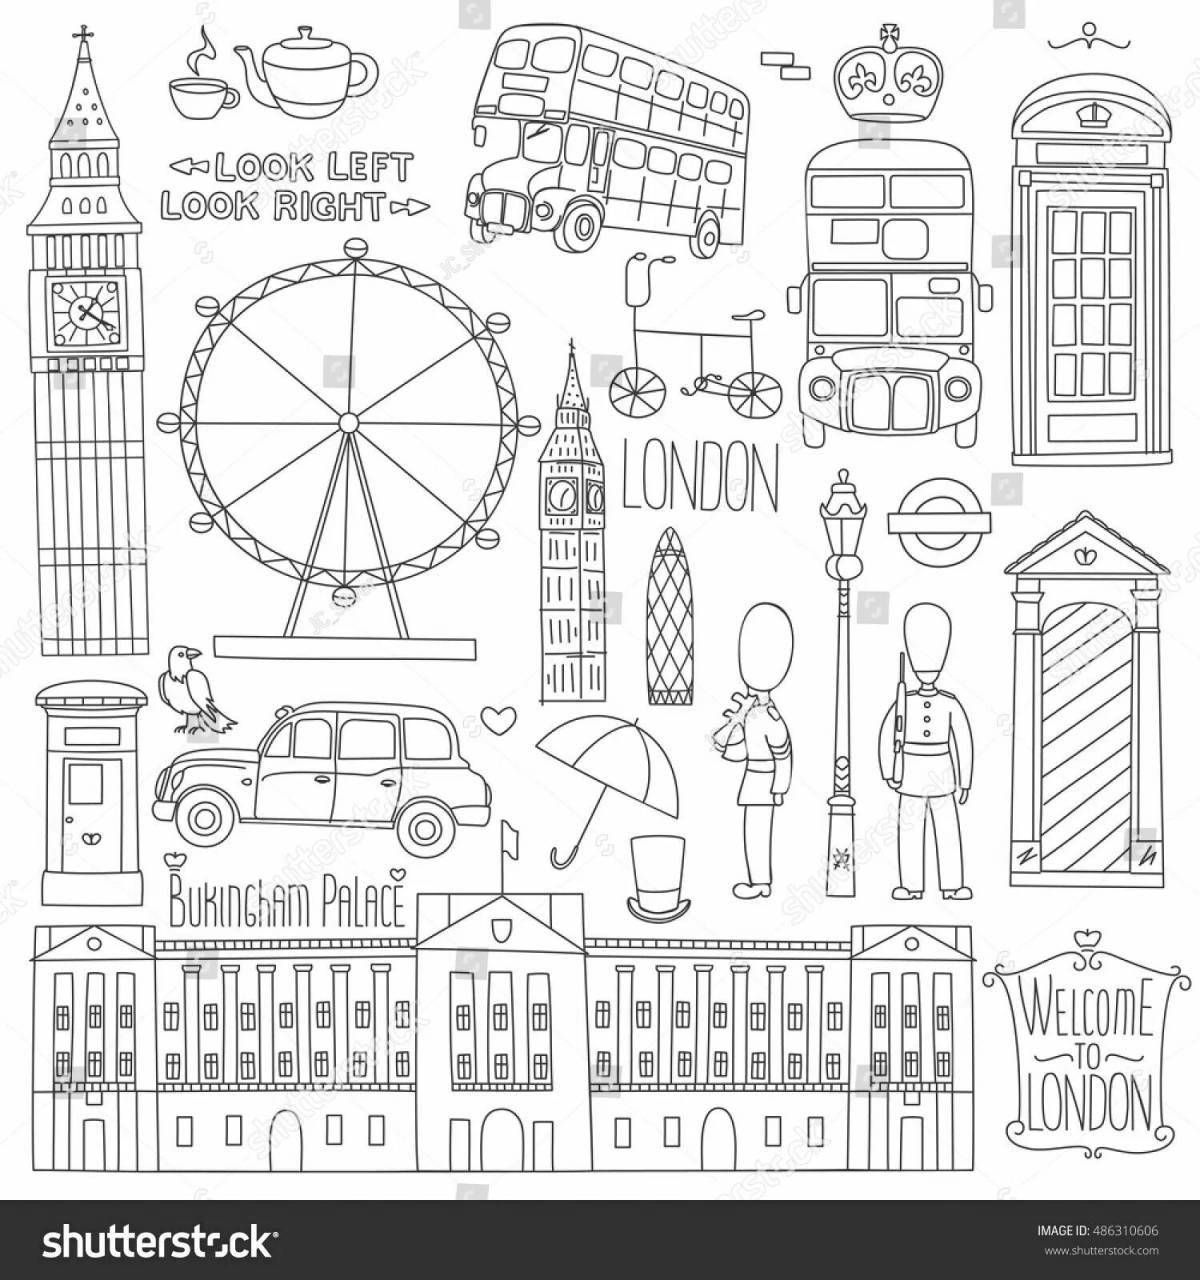 Playful London coloring book for kids